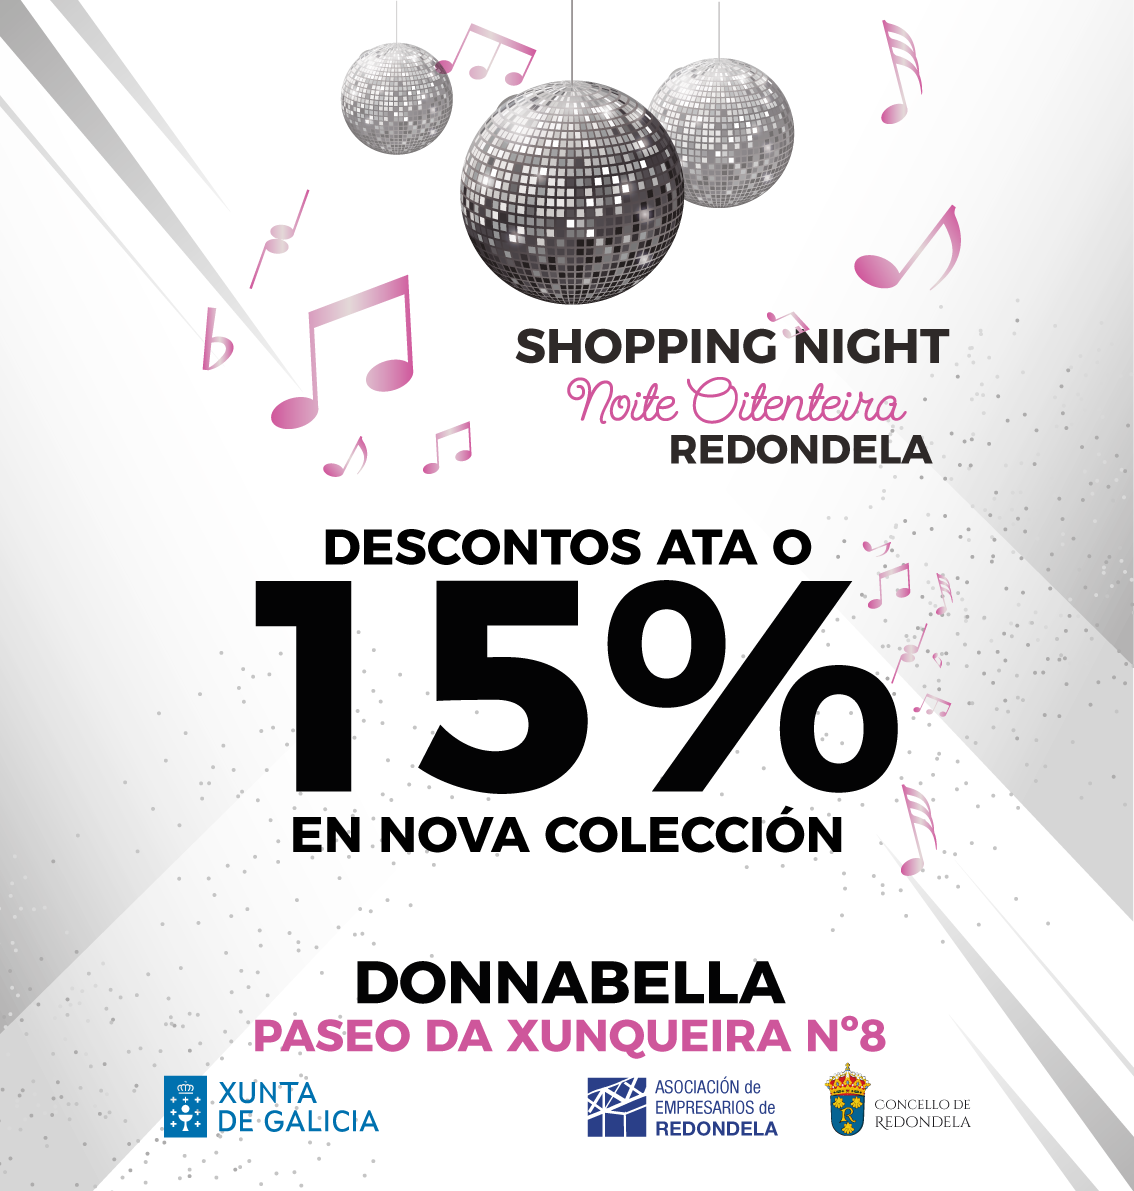 PROMO_DONNABELLA.png